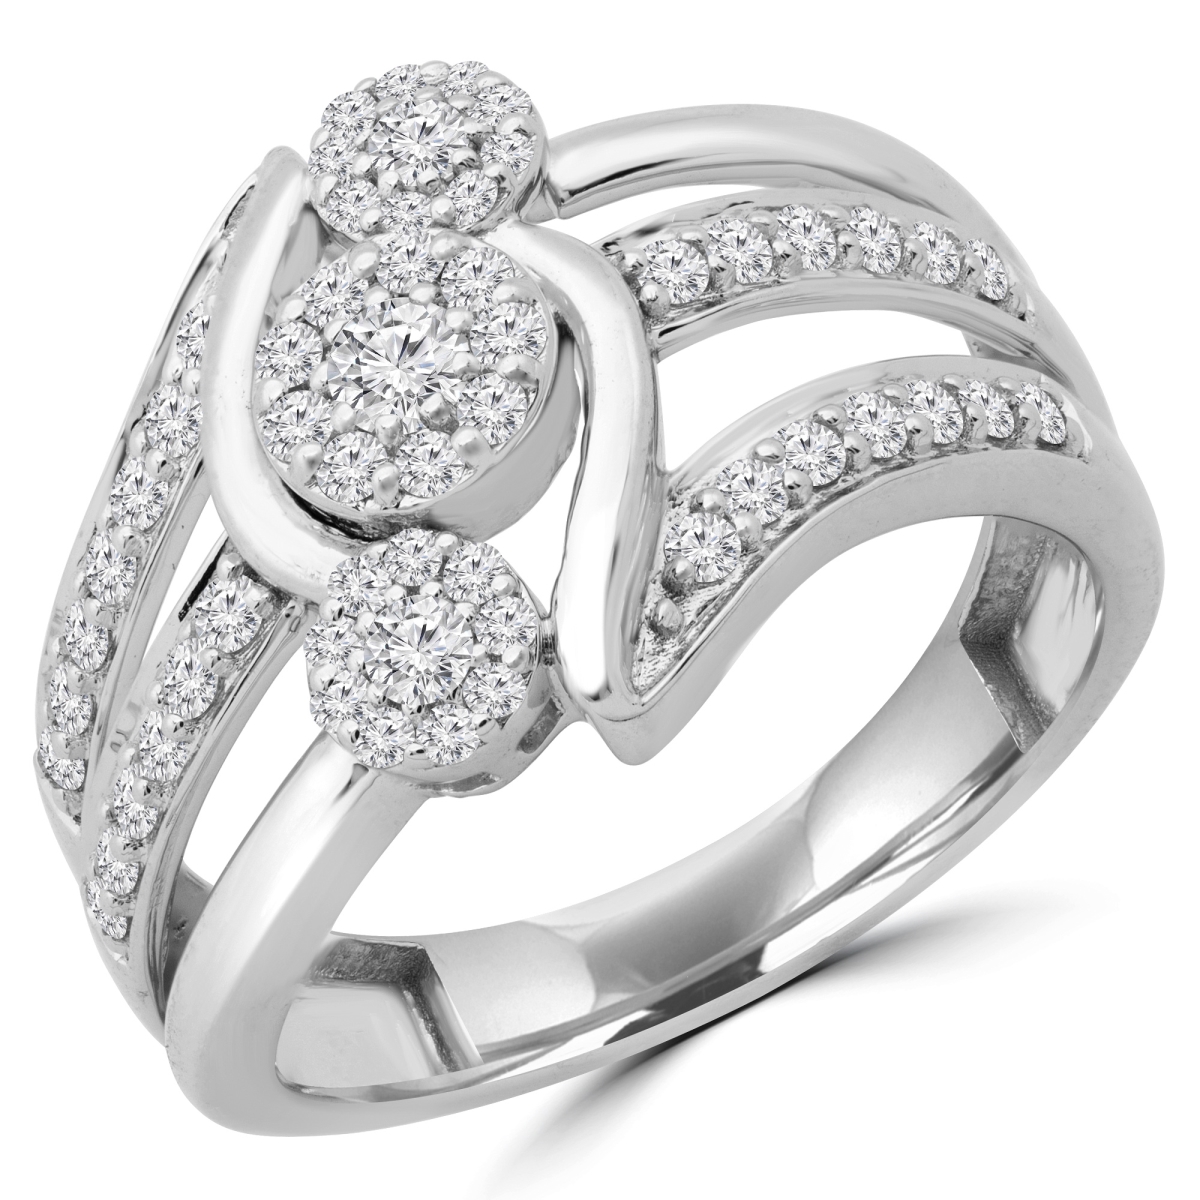 Picture of Majesty Diamonds MDR190085-3.5 0.5 CTW Round Diamond Vintage Cocktail Ring in 14K White Gold - Size 3.5